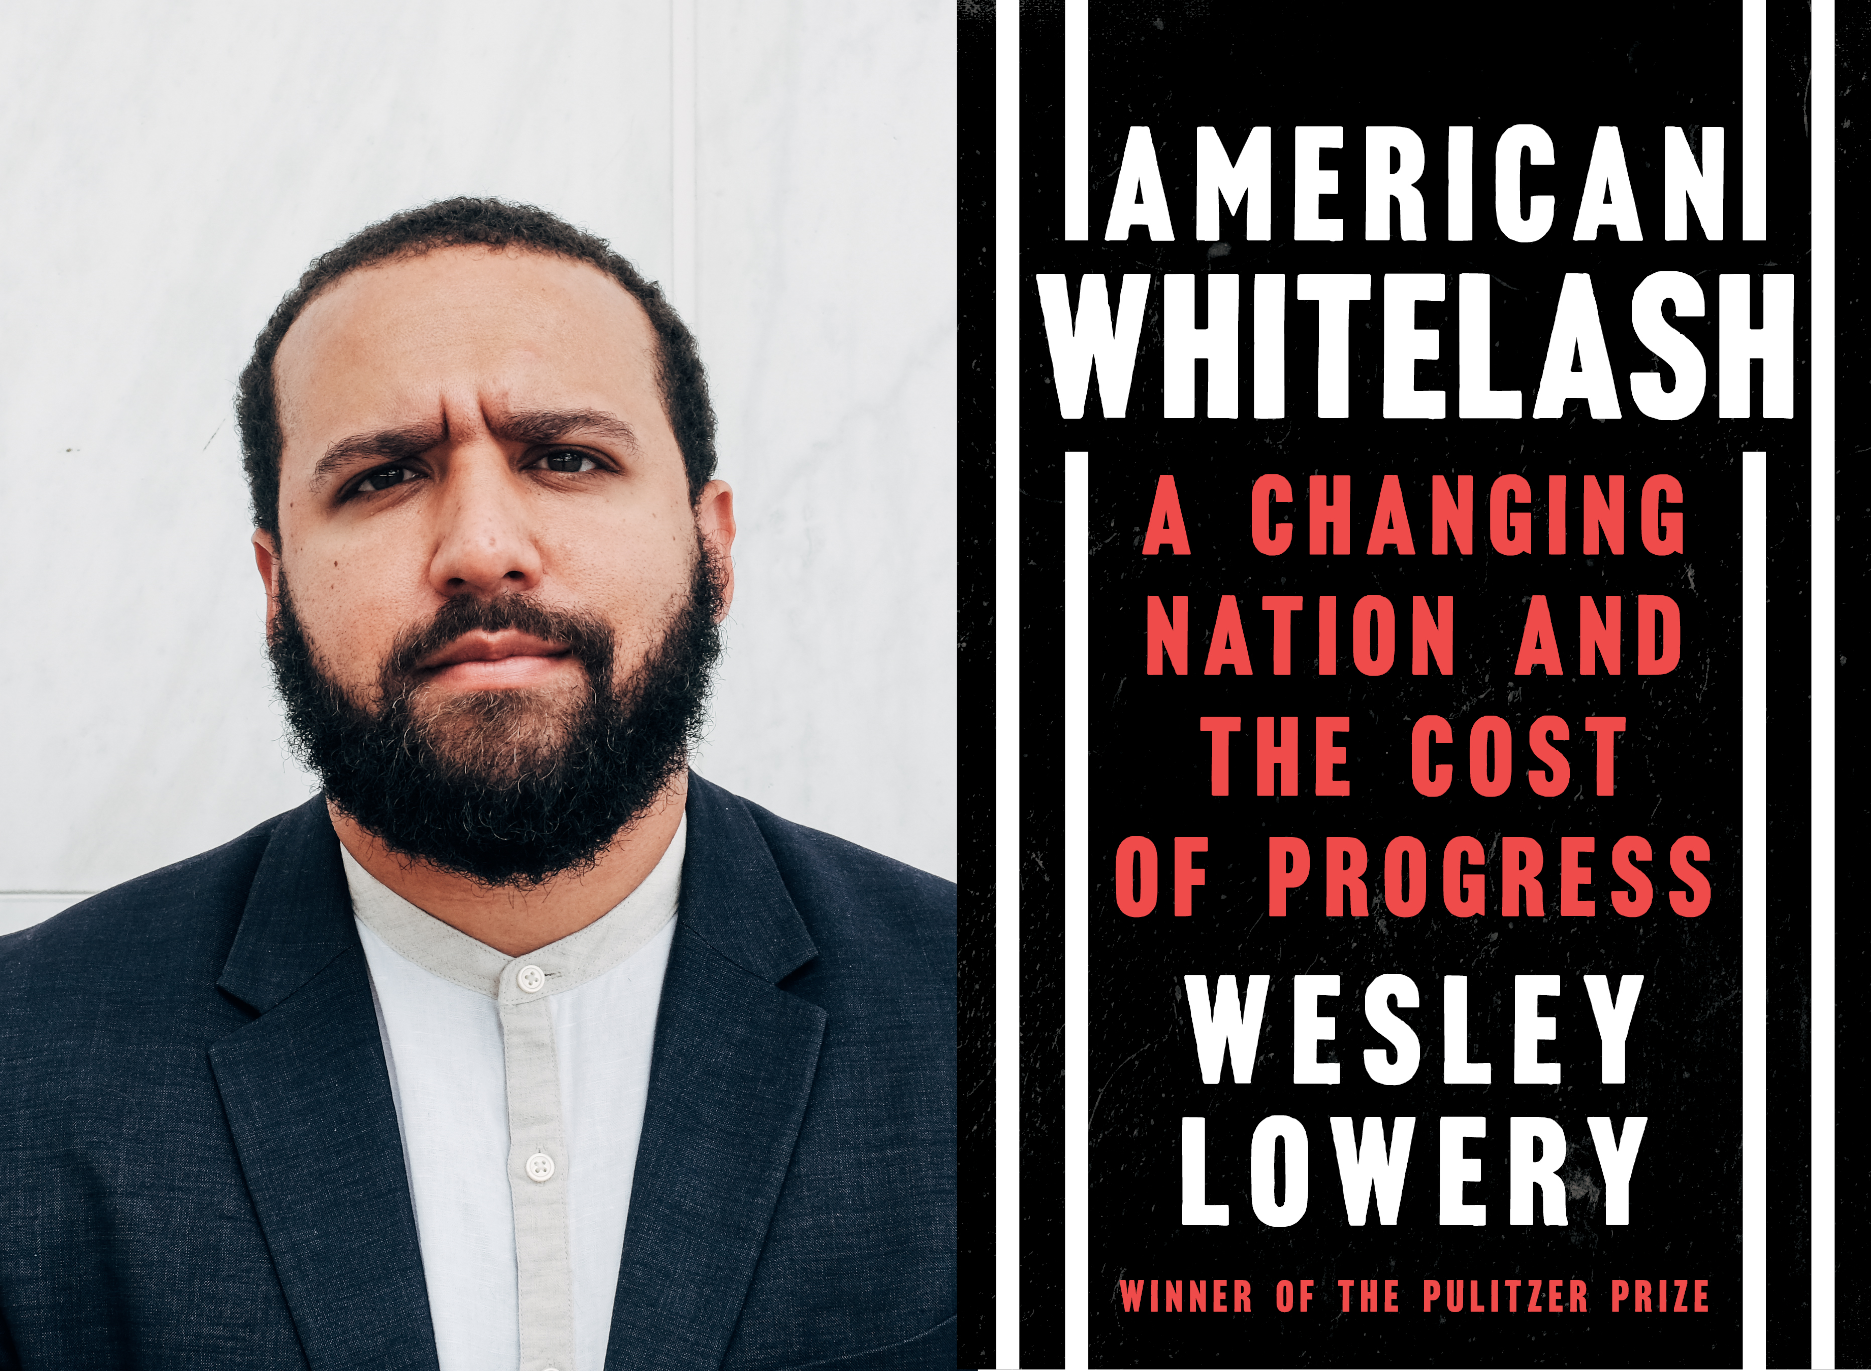 Wesley Lowery explores white supremacist violence in "American Whitelash"